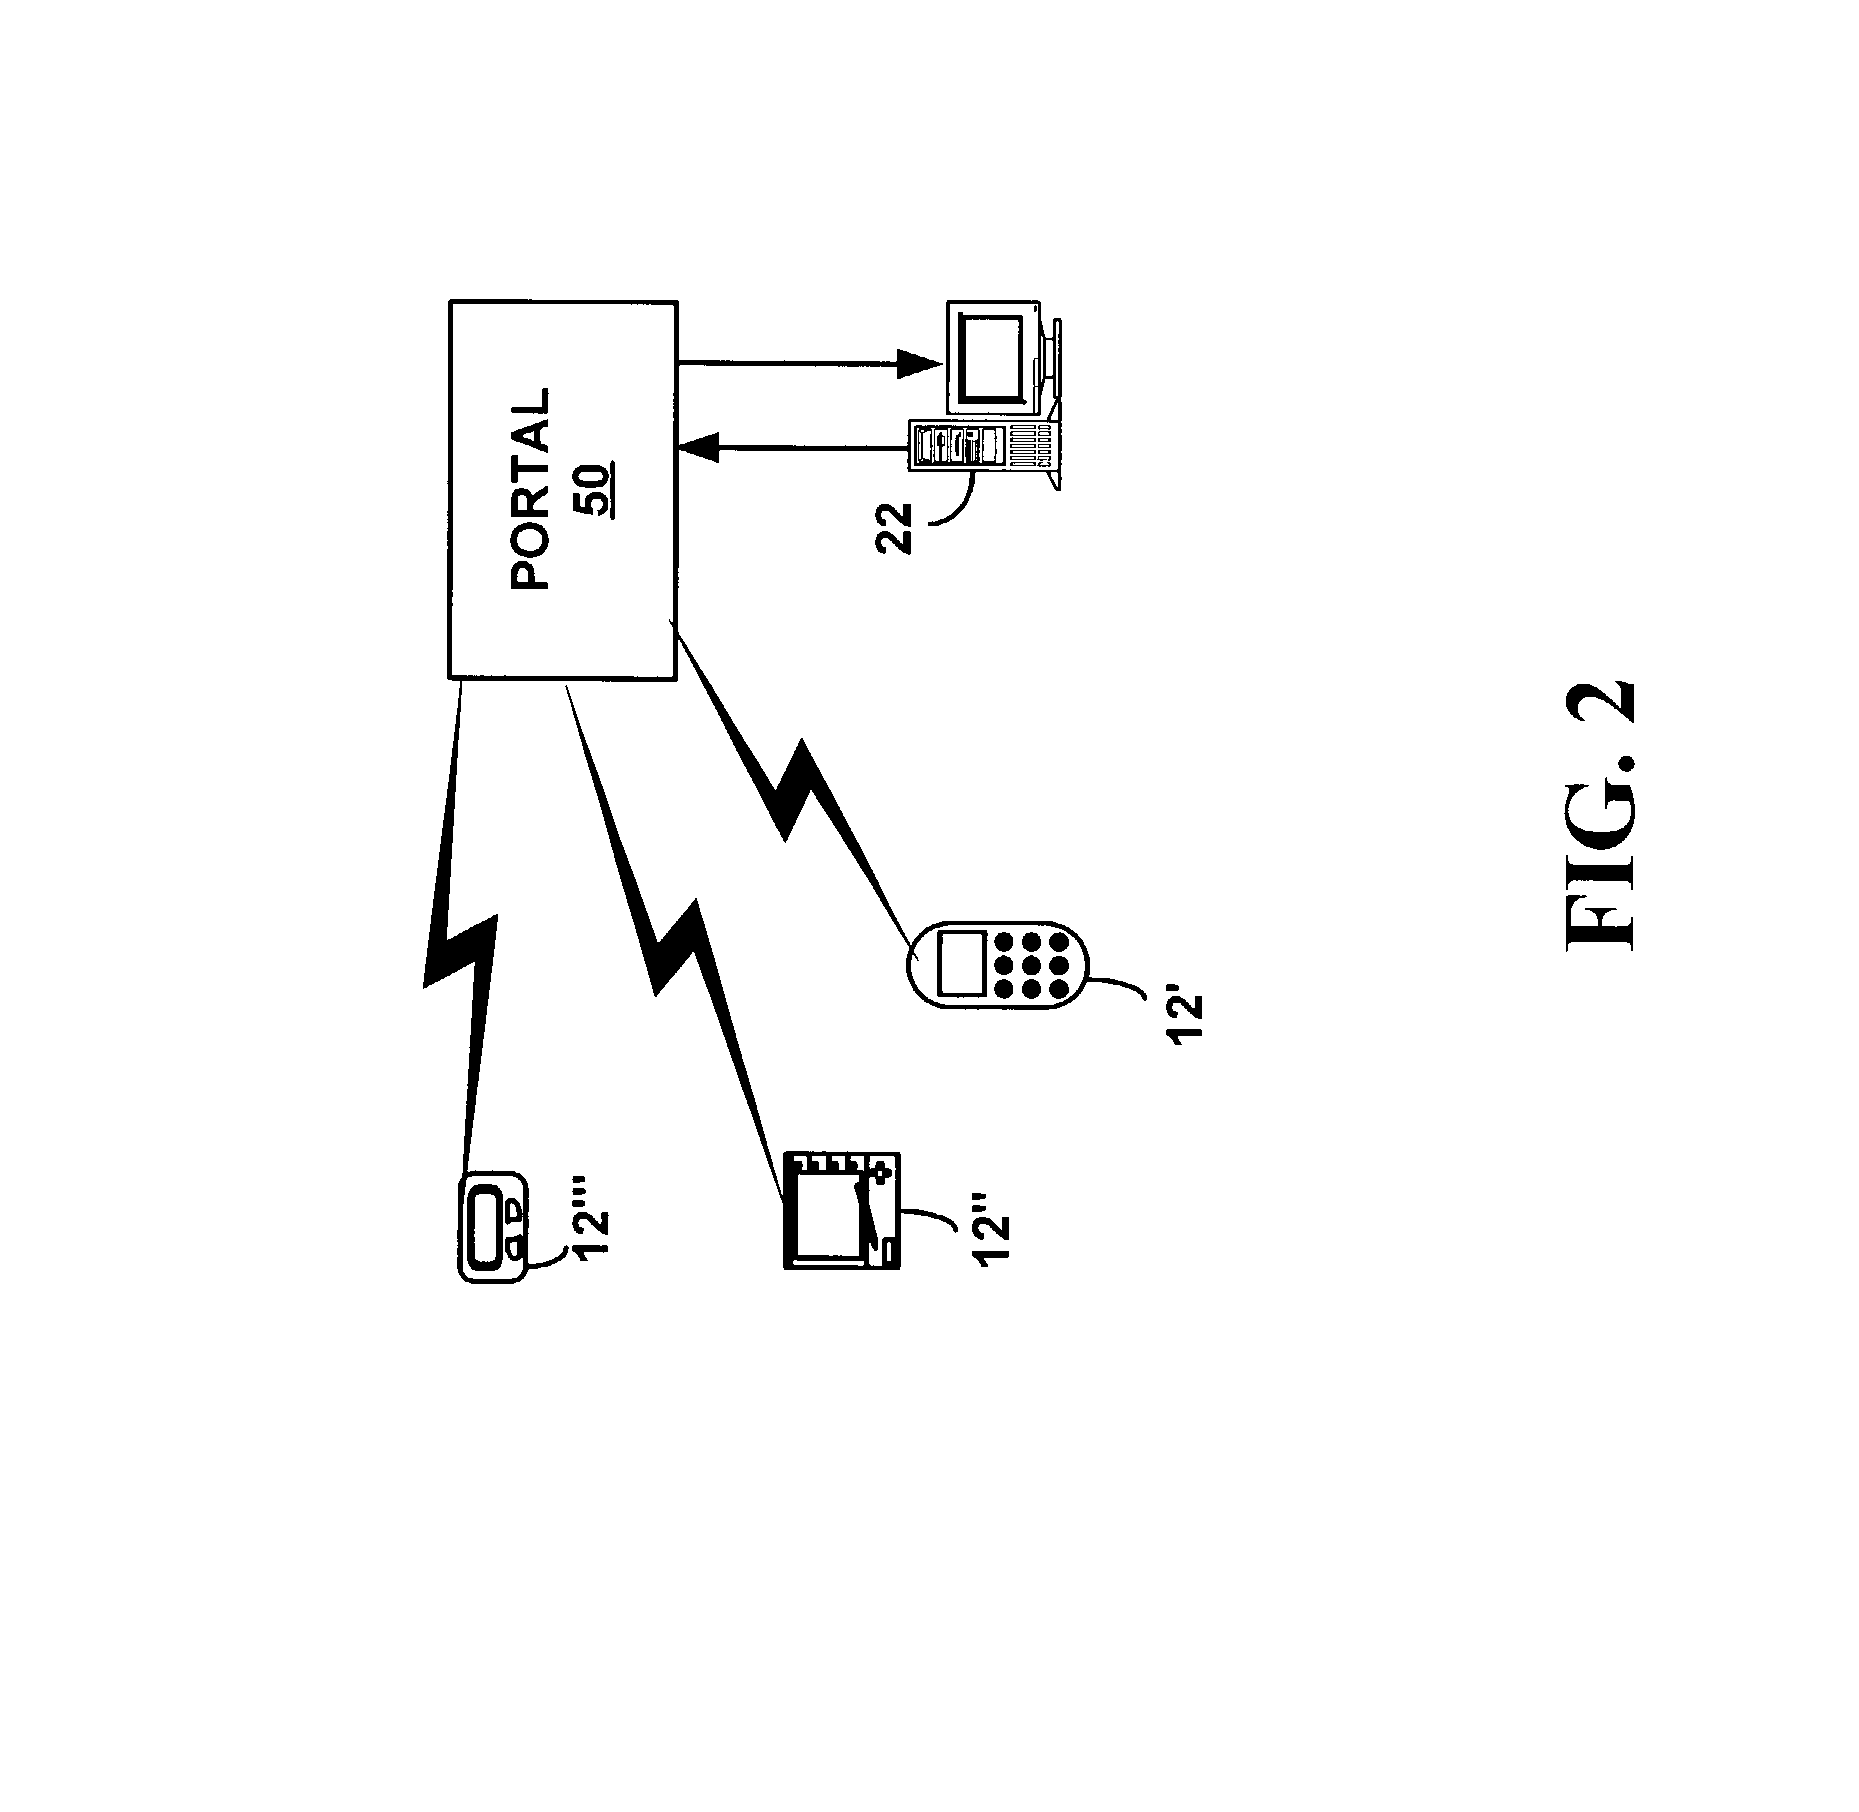 Method and system for creating and providing web-based documents to information devices